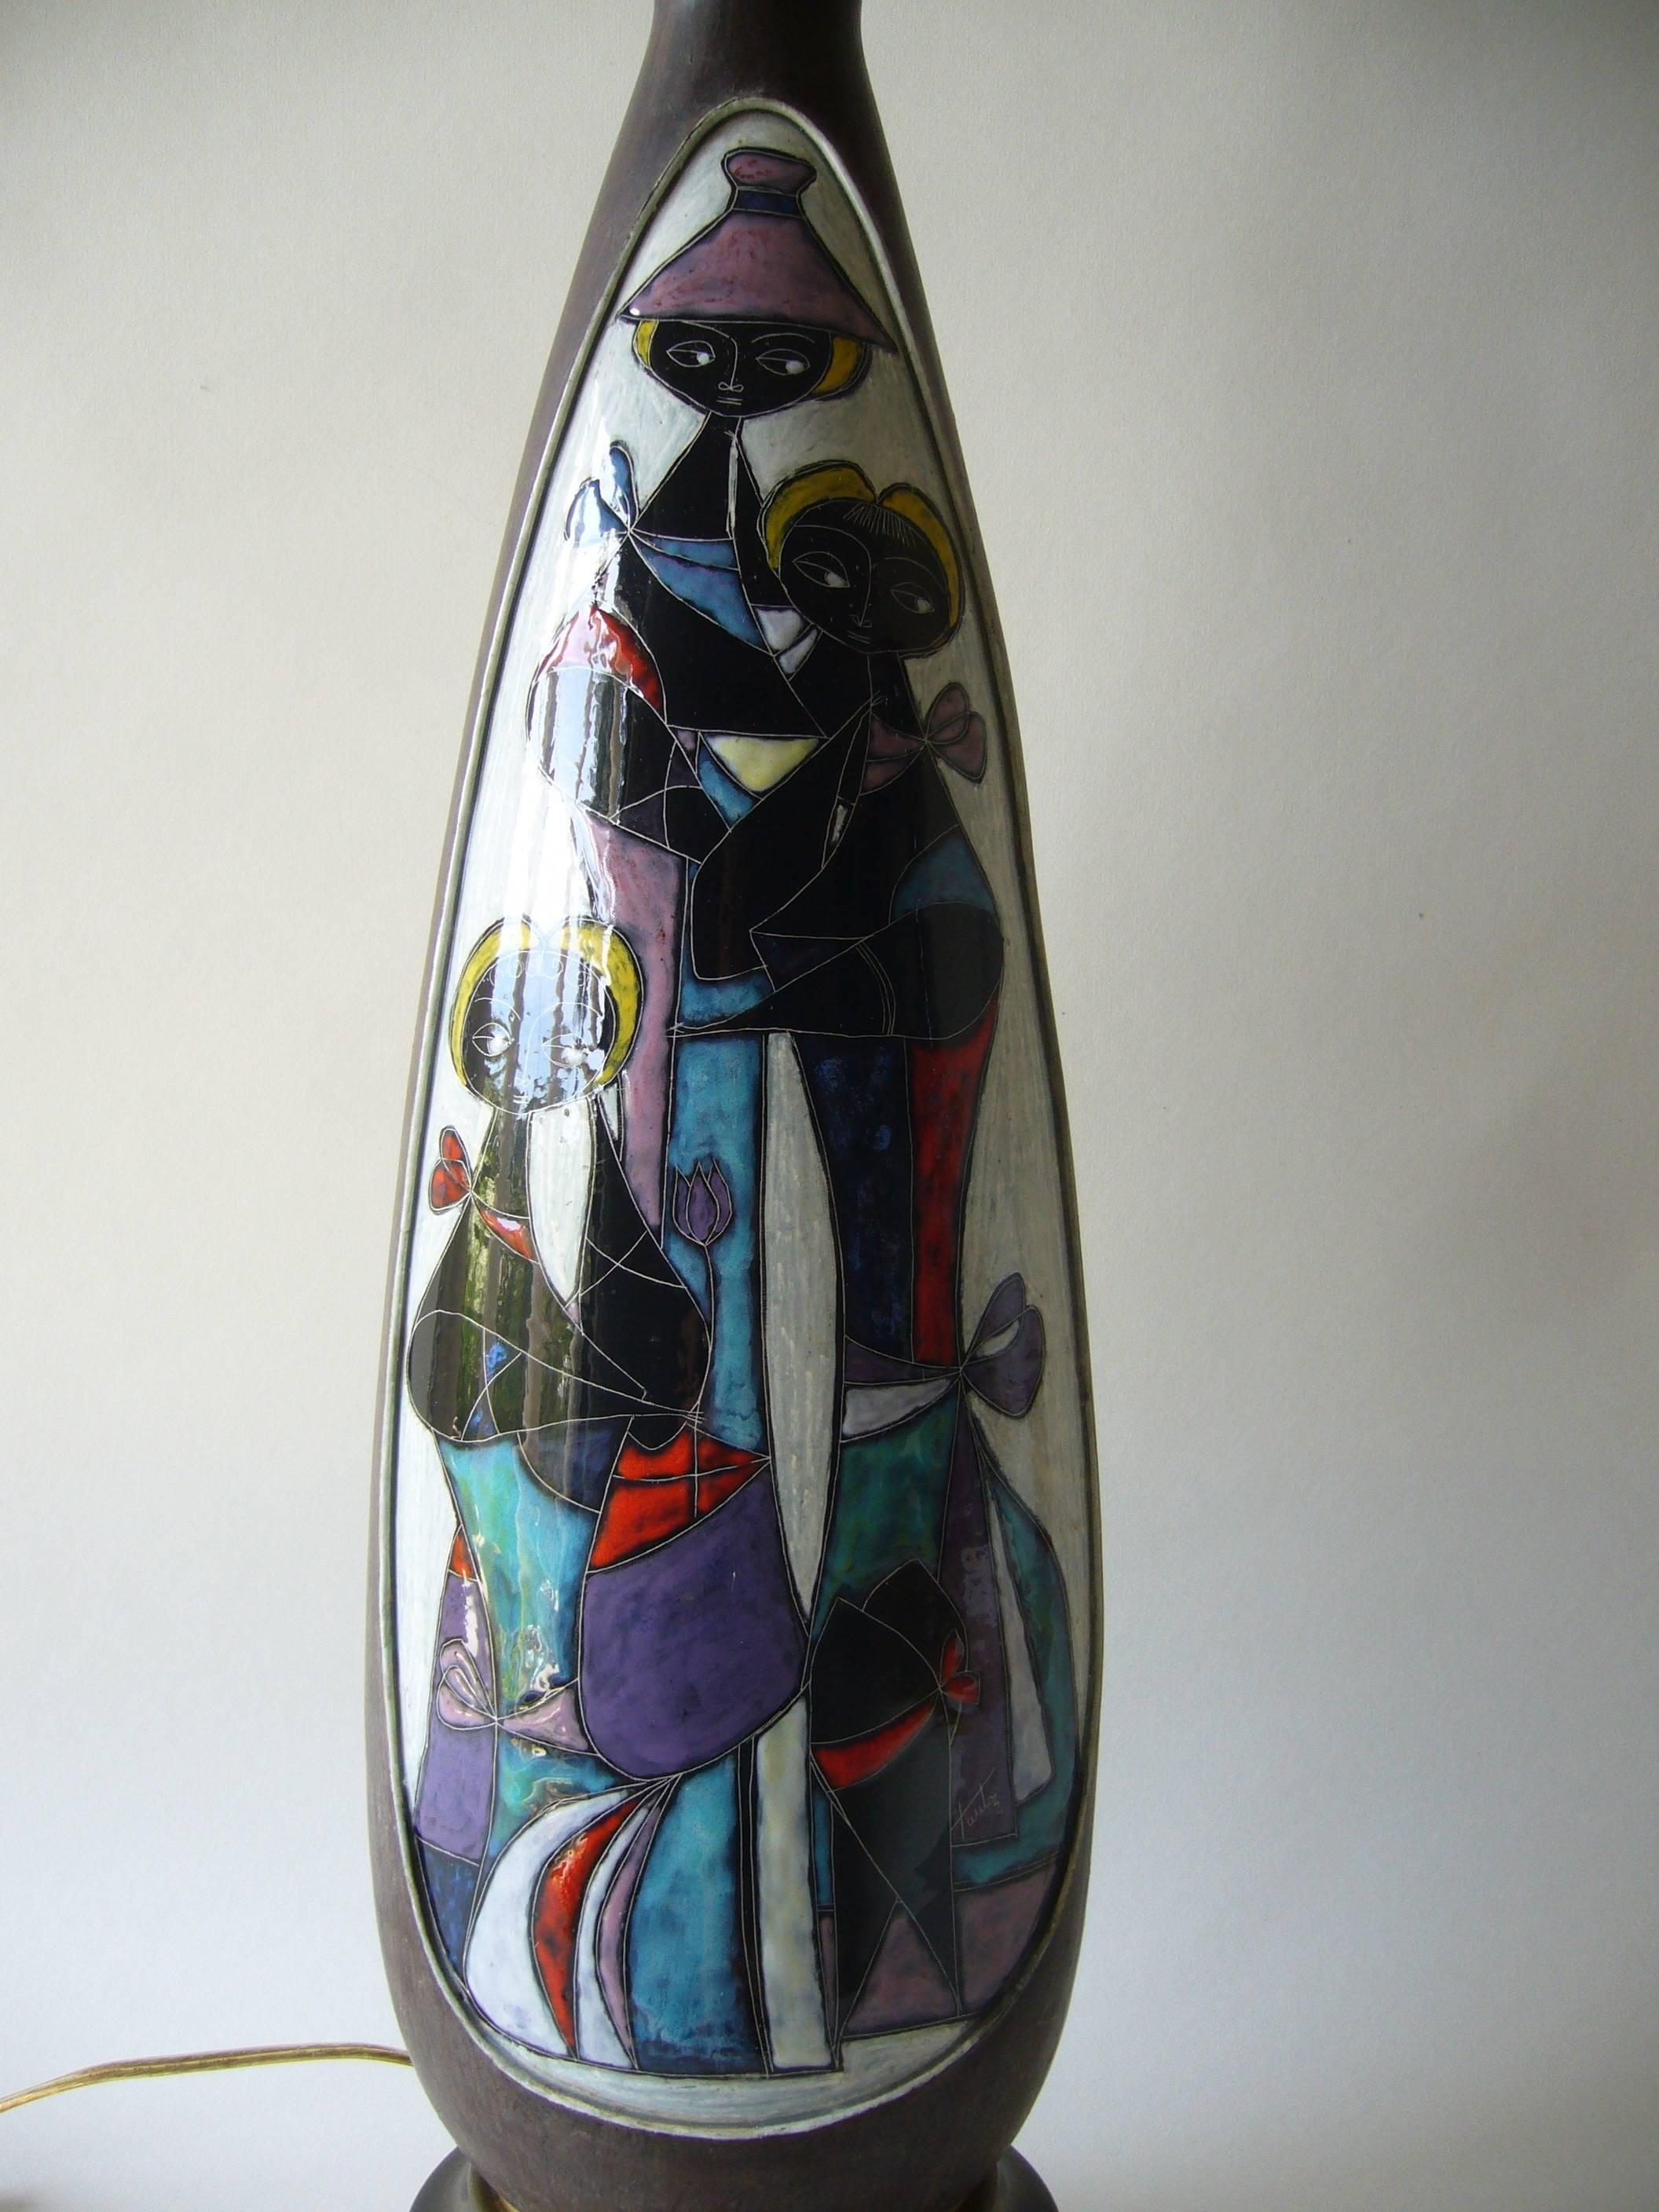 Figural ceramic lamp base made by Marcello Fantoni of Florence, Italy. Lamp features modernist figures that Fantoni used often in his lighting and ceramic designs. Lamp base measures 24